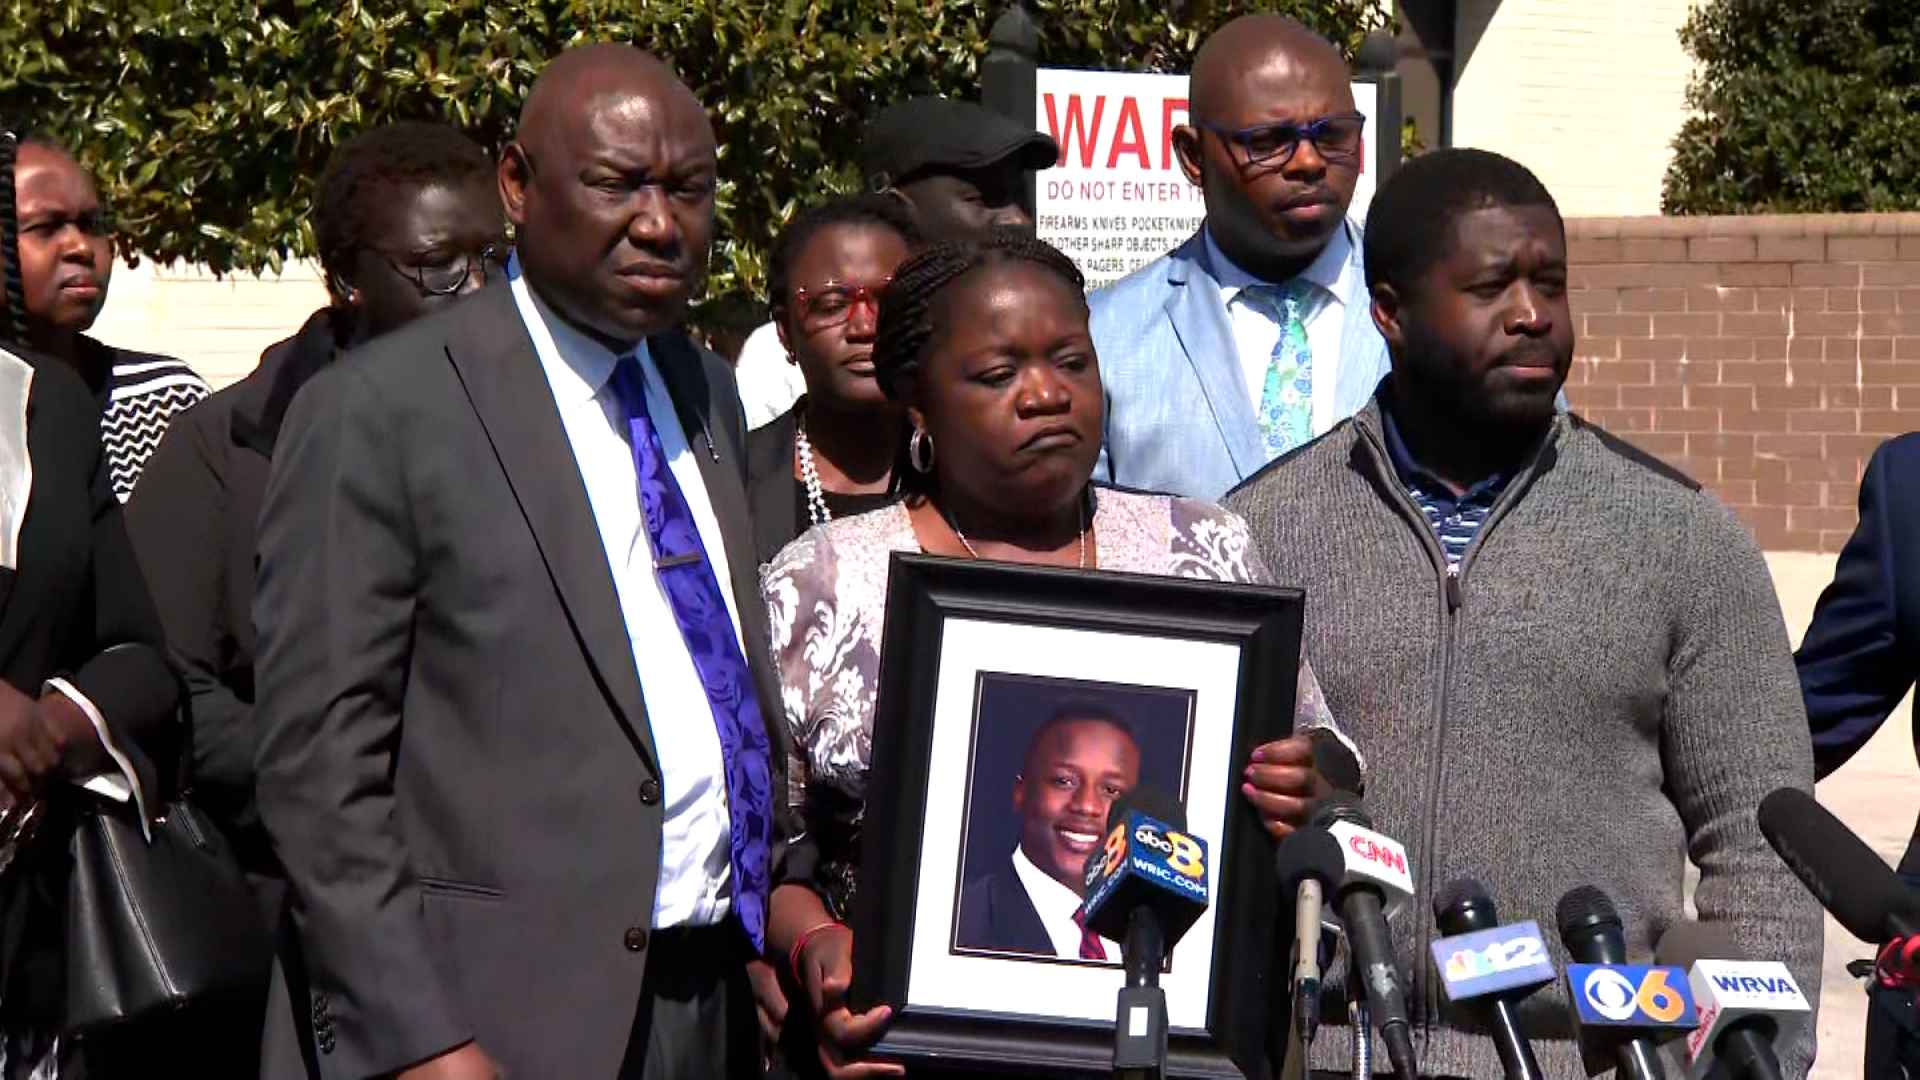 Caroline Ouko holds a portrait of her son alongside attorney Ben Crump, left, and her other son, Leon Ochieng, right, during a press conference on March 16 in Dinwiddie, Virginia. 